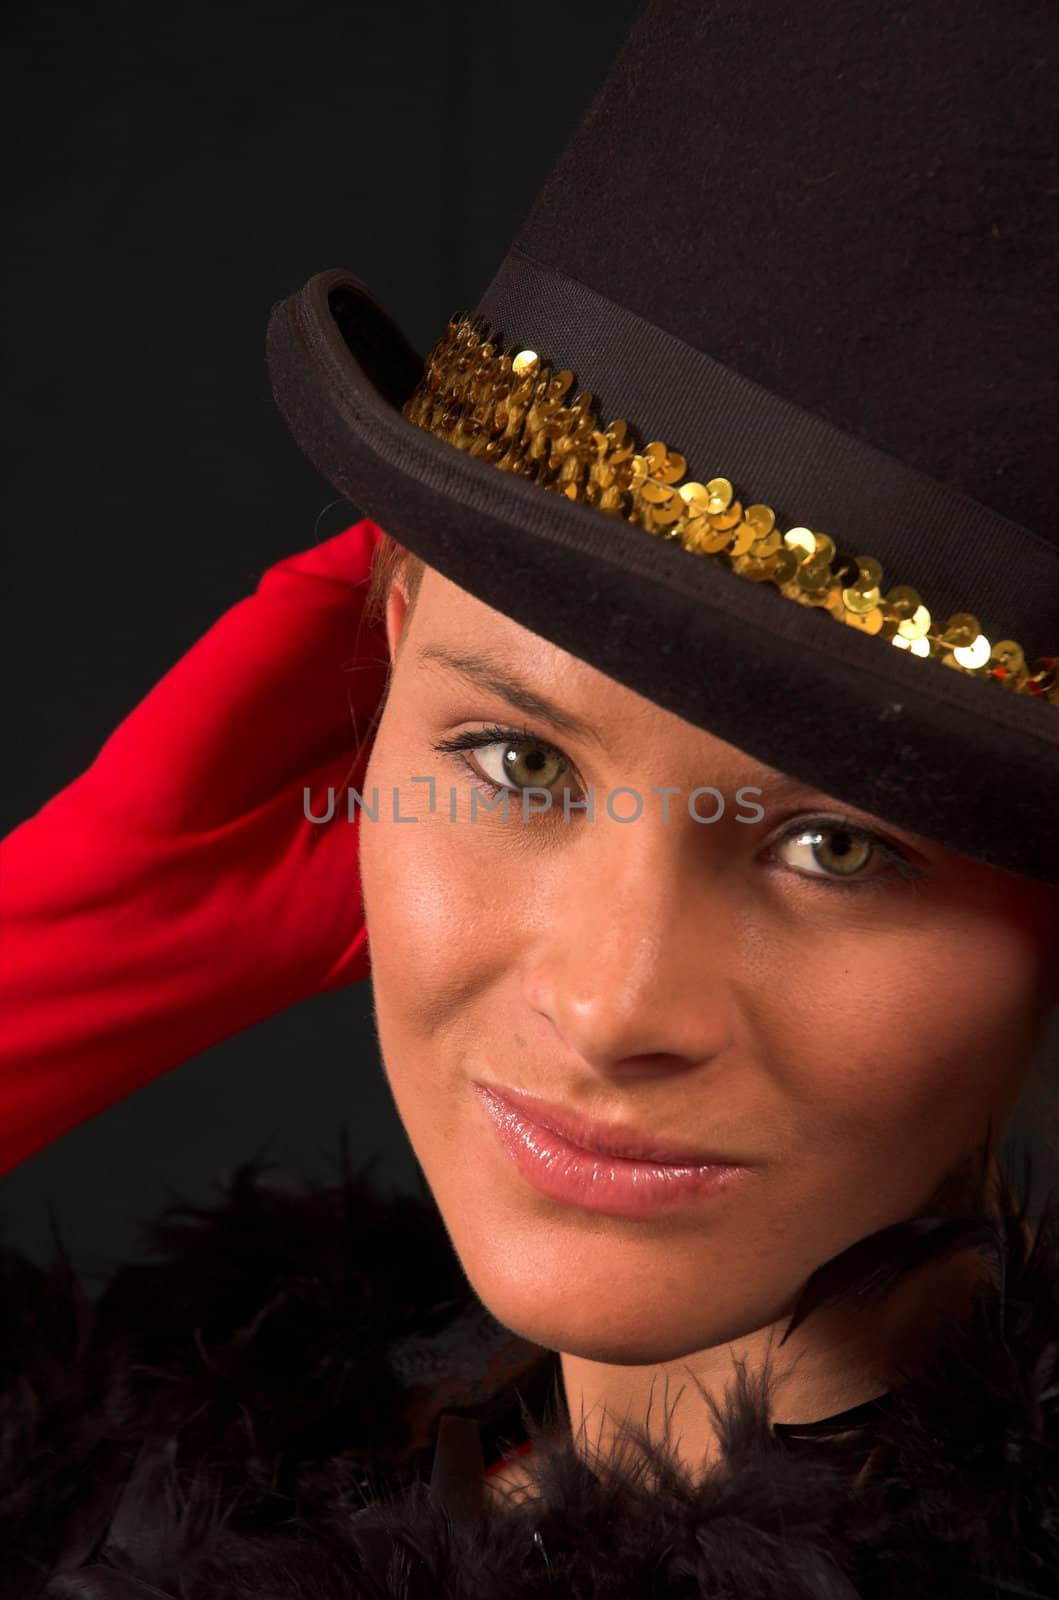 Moulin Rouge model with hat and red gloves holding hat on head with gold band and red gloves behind head